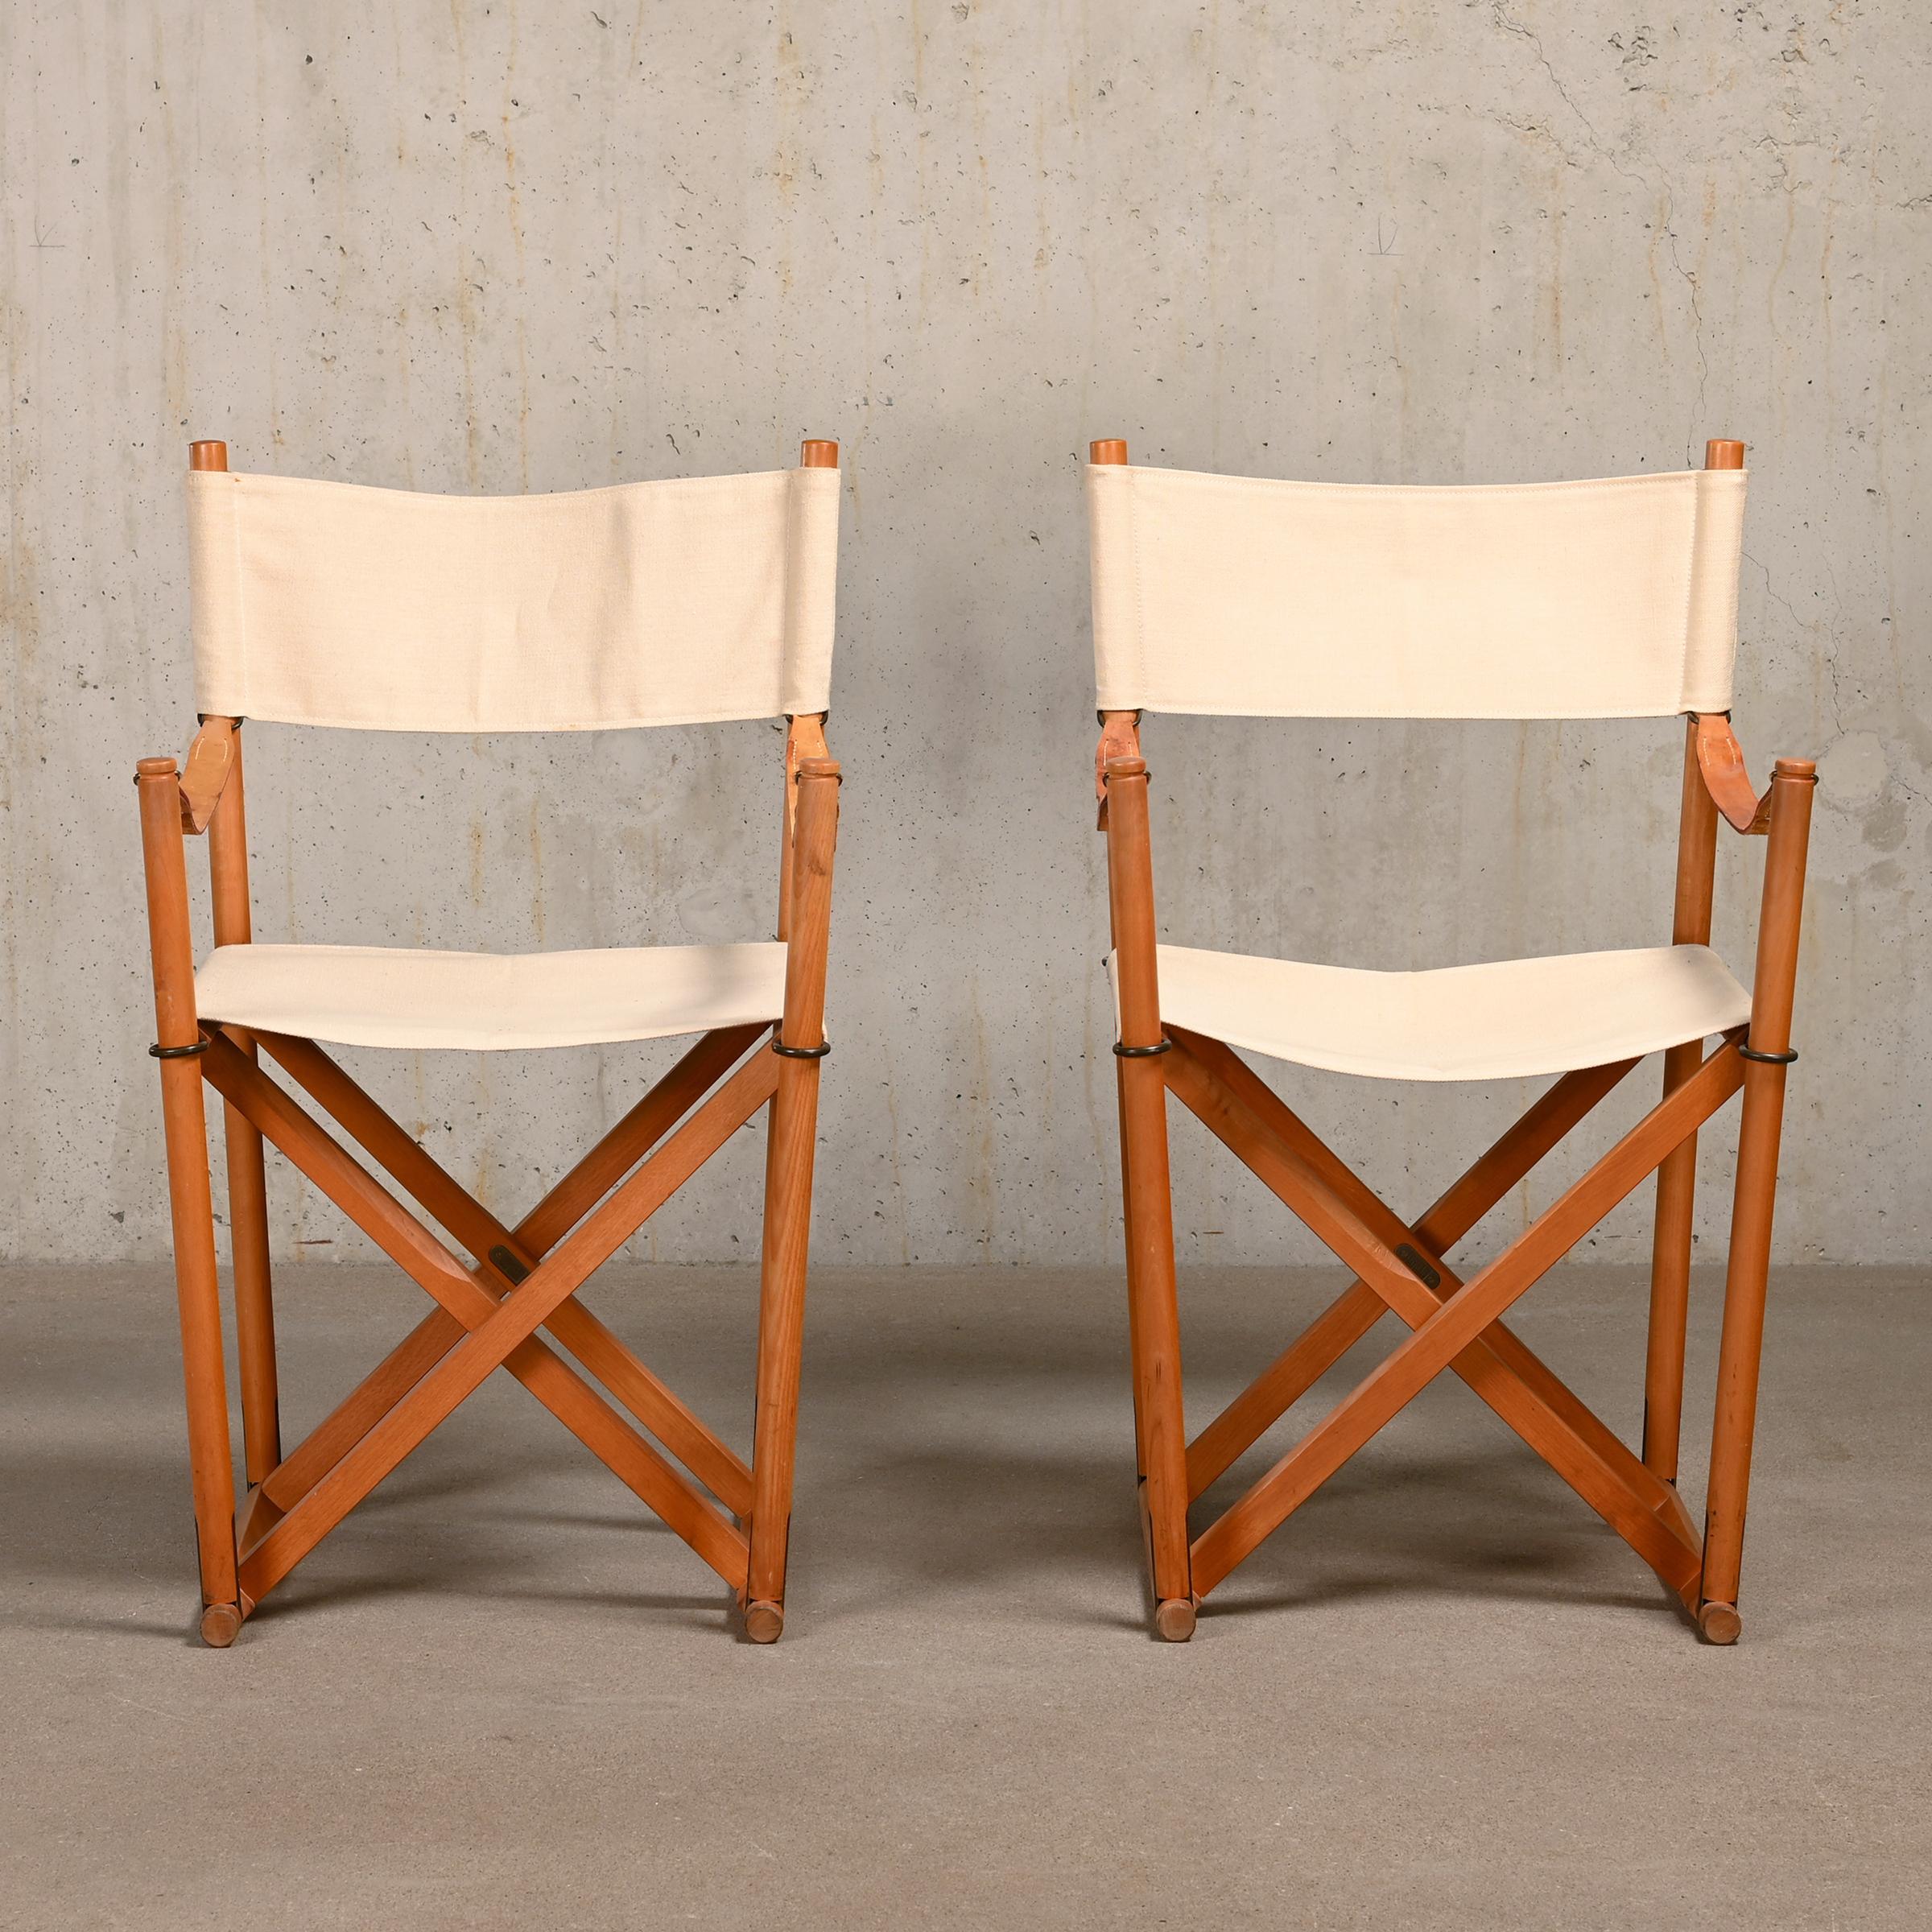 Beautiful made Folding Chairs (model MK16) designed by Mogens Koch in the early thirties. These examples are manufactured by Rud Rasmussen and features a beech wood frame with brass fittings and canvas upholstery with full-grain leather straps.